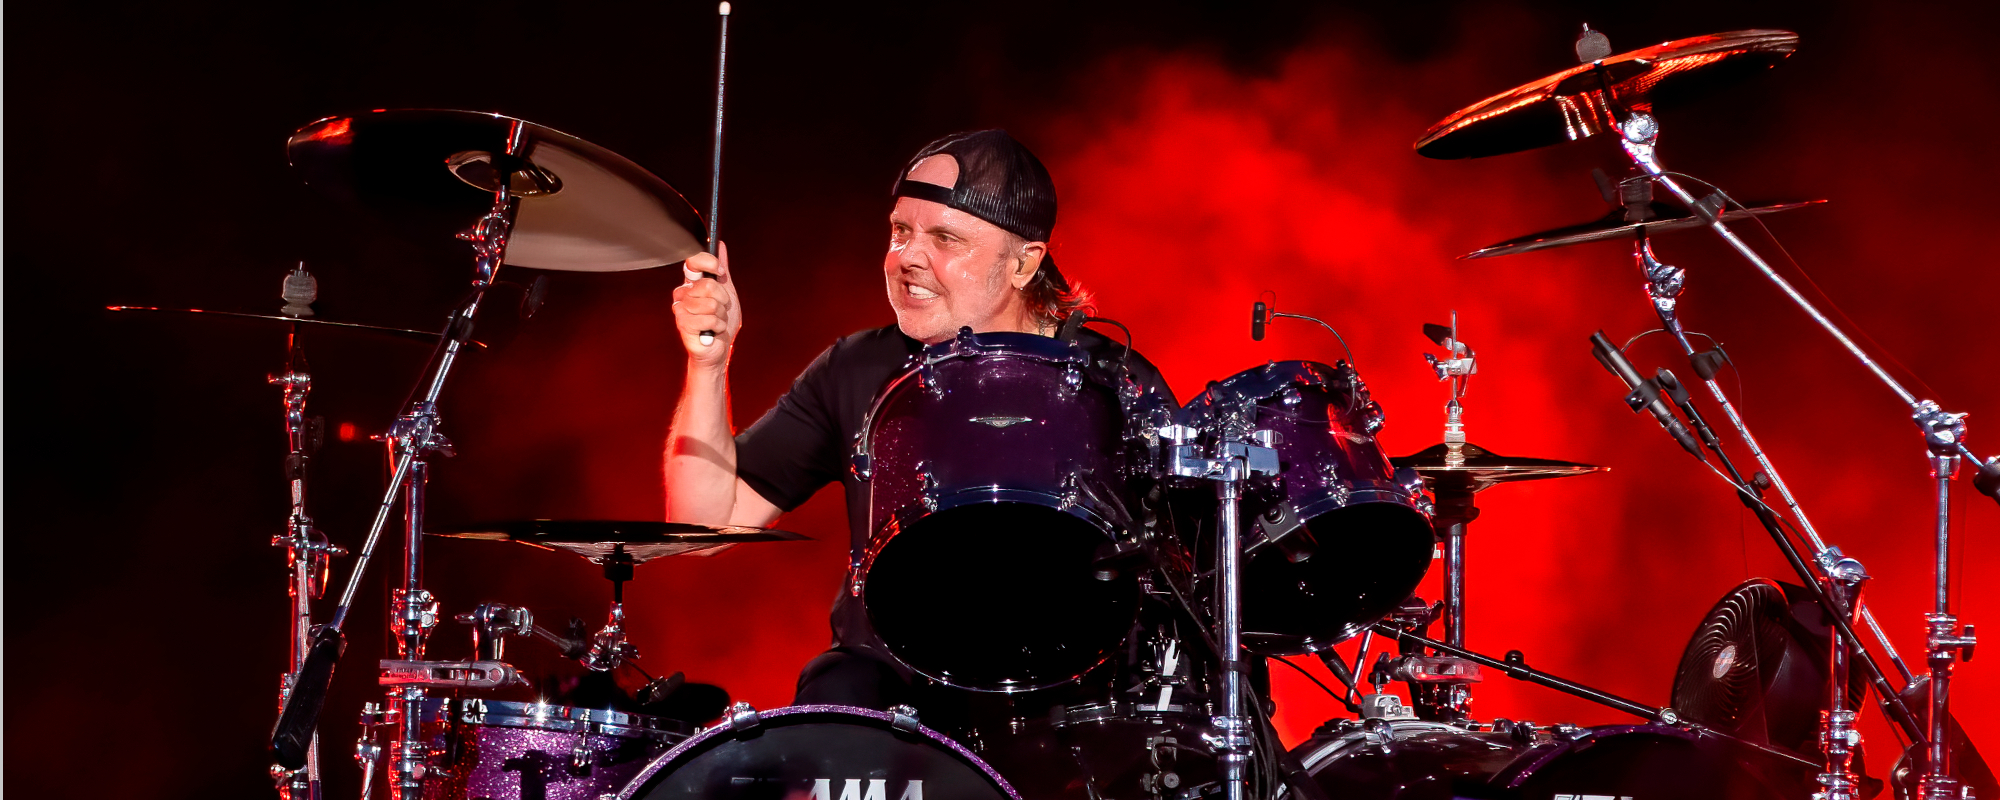 The 10 Best Lars Ulrich (of Metallica) Quotes